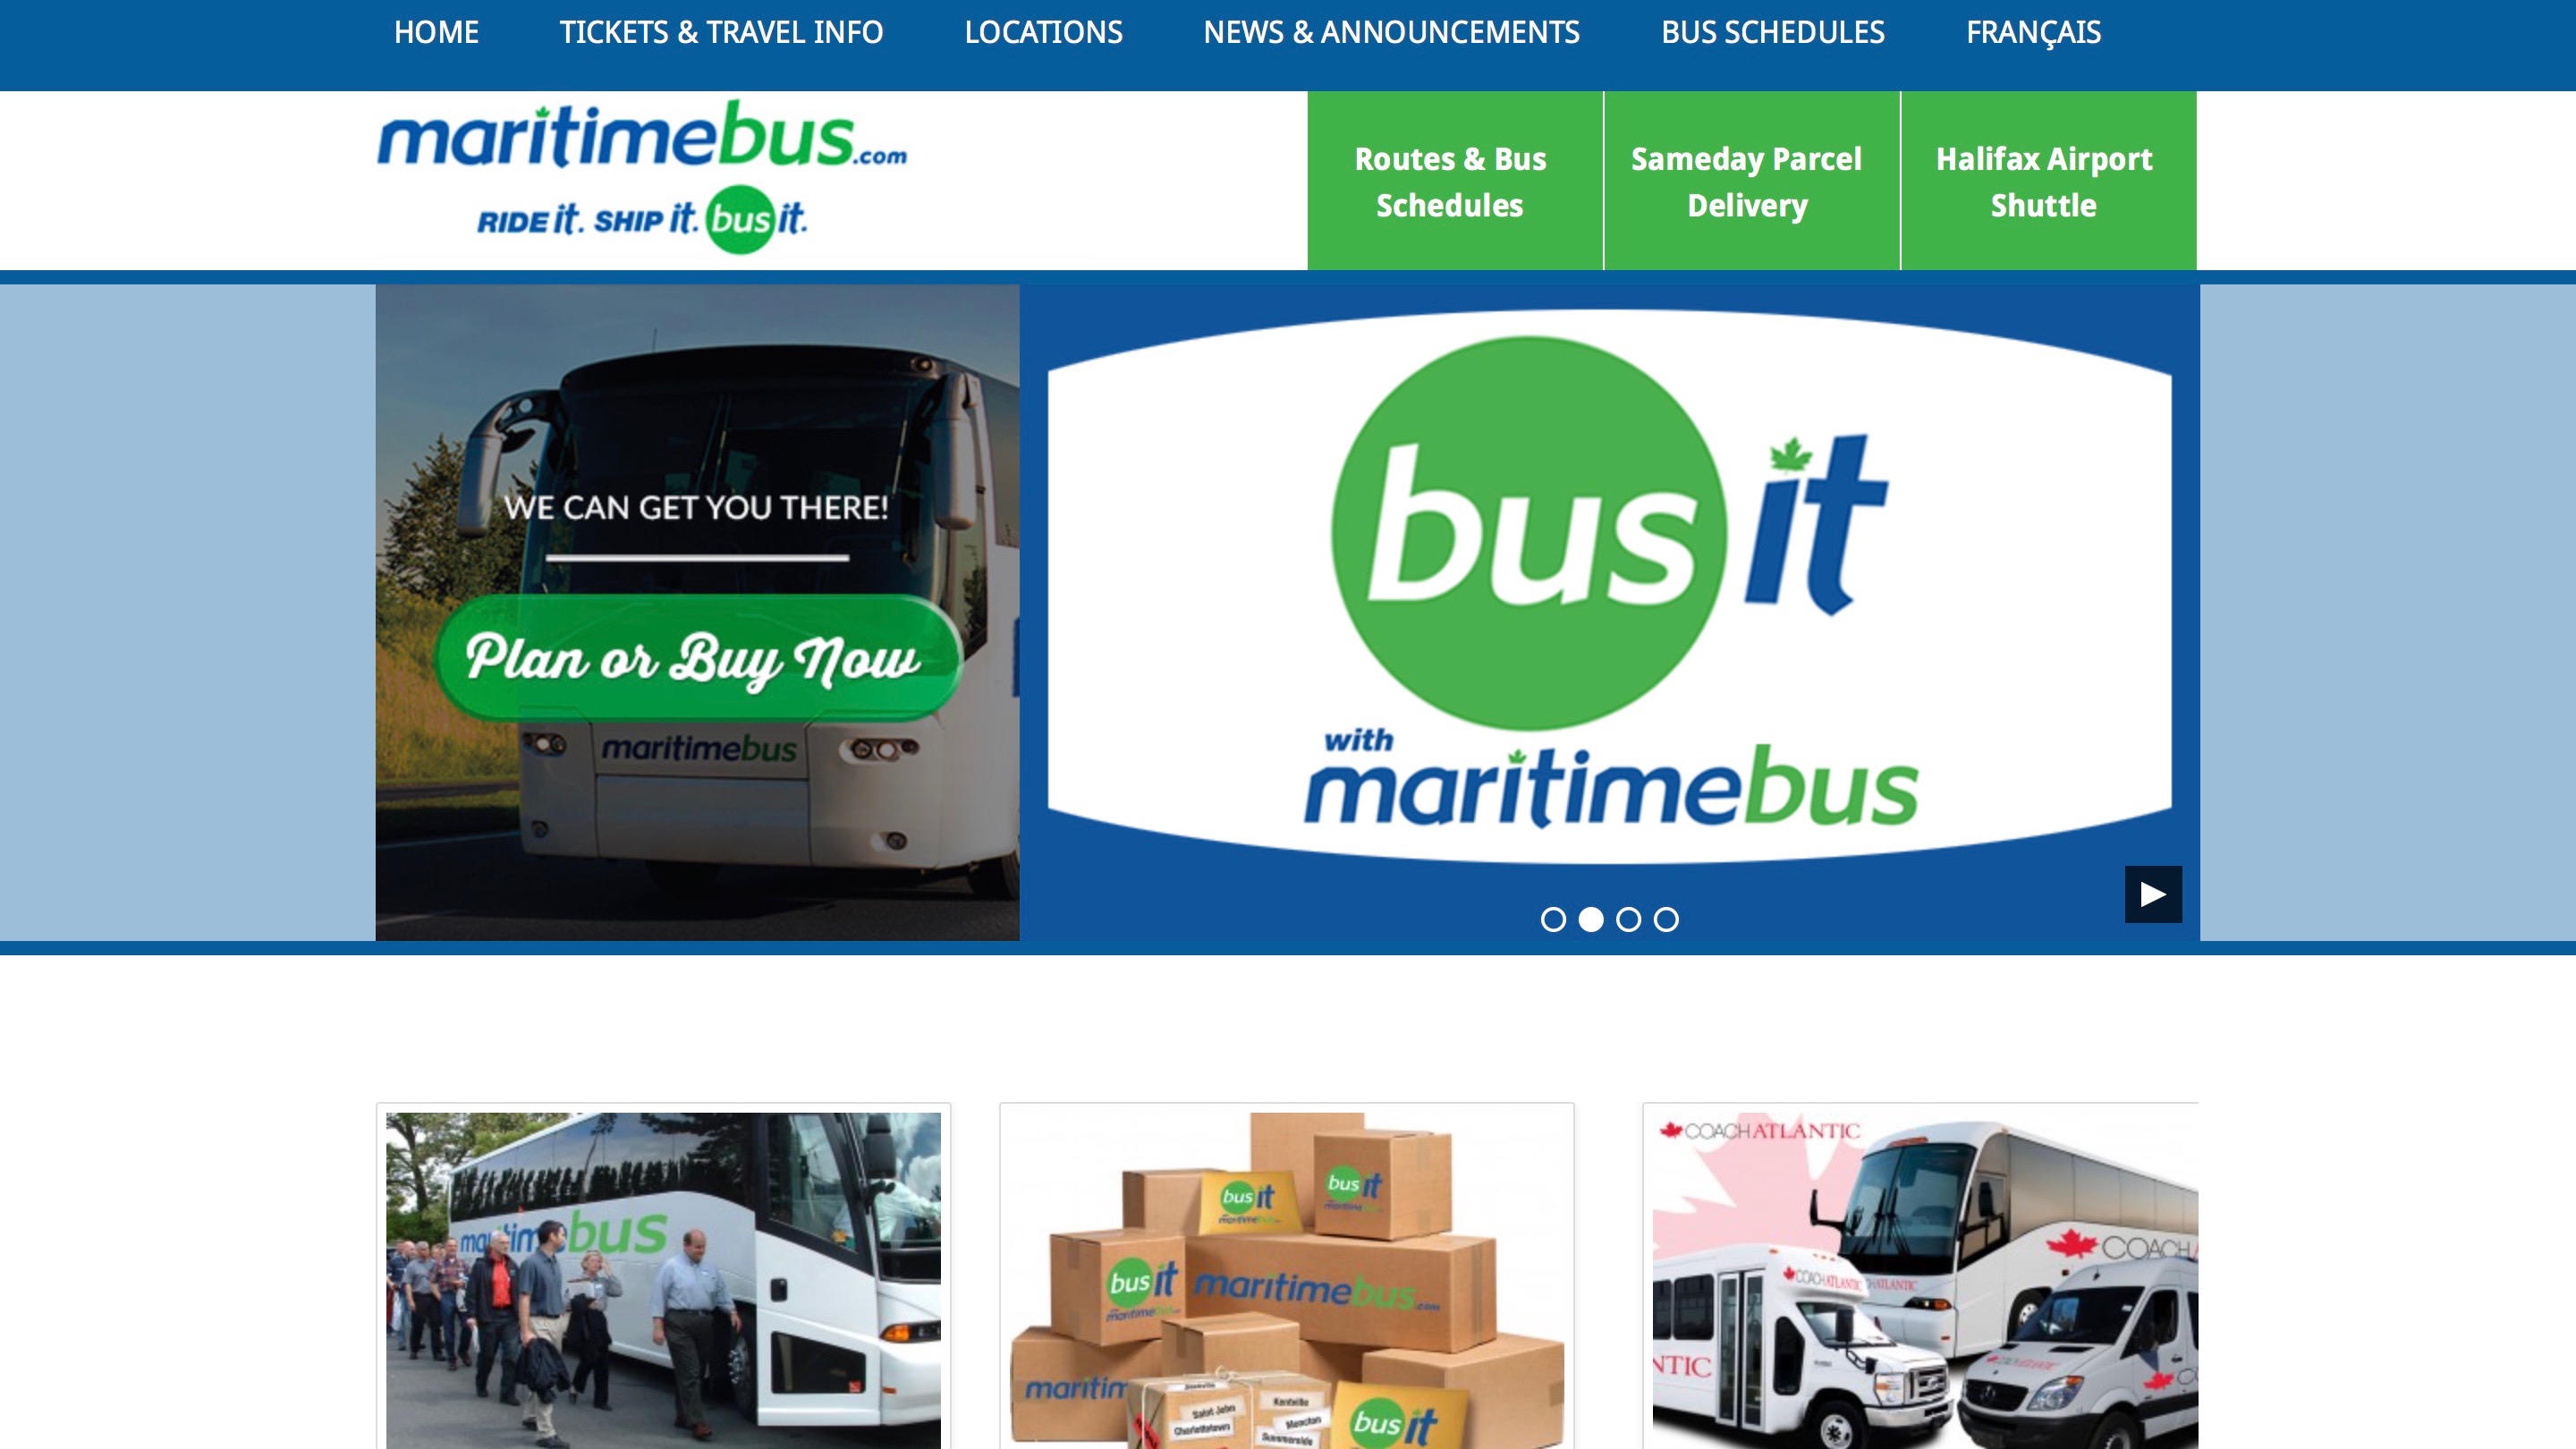 Maritime Bus announced the changes on its website.